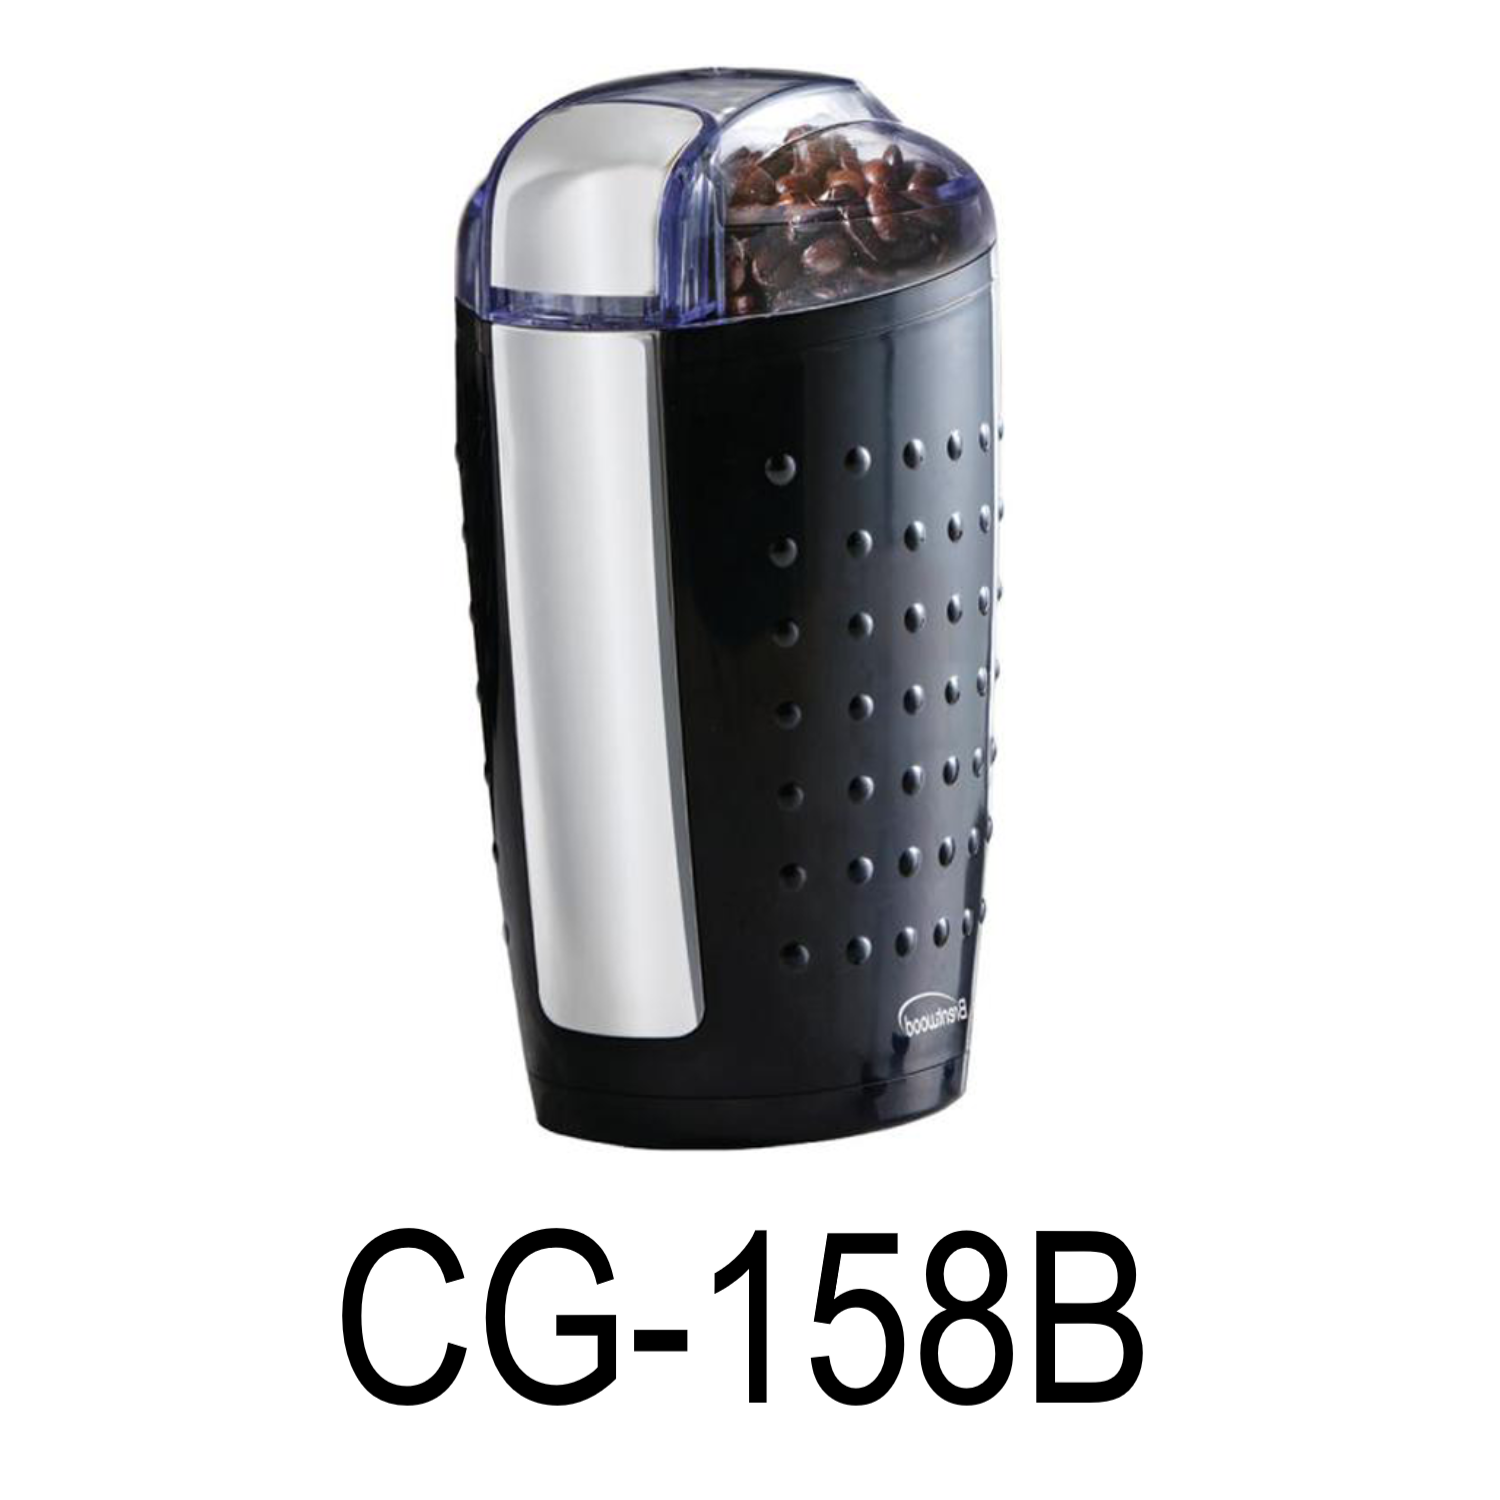 Brentwood Appliances CG-158W Electric Stainless Steel Coffee Grinder